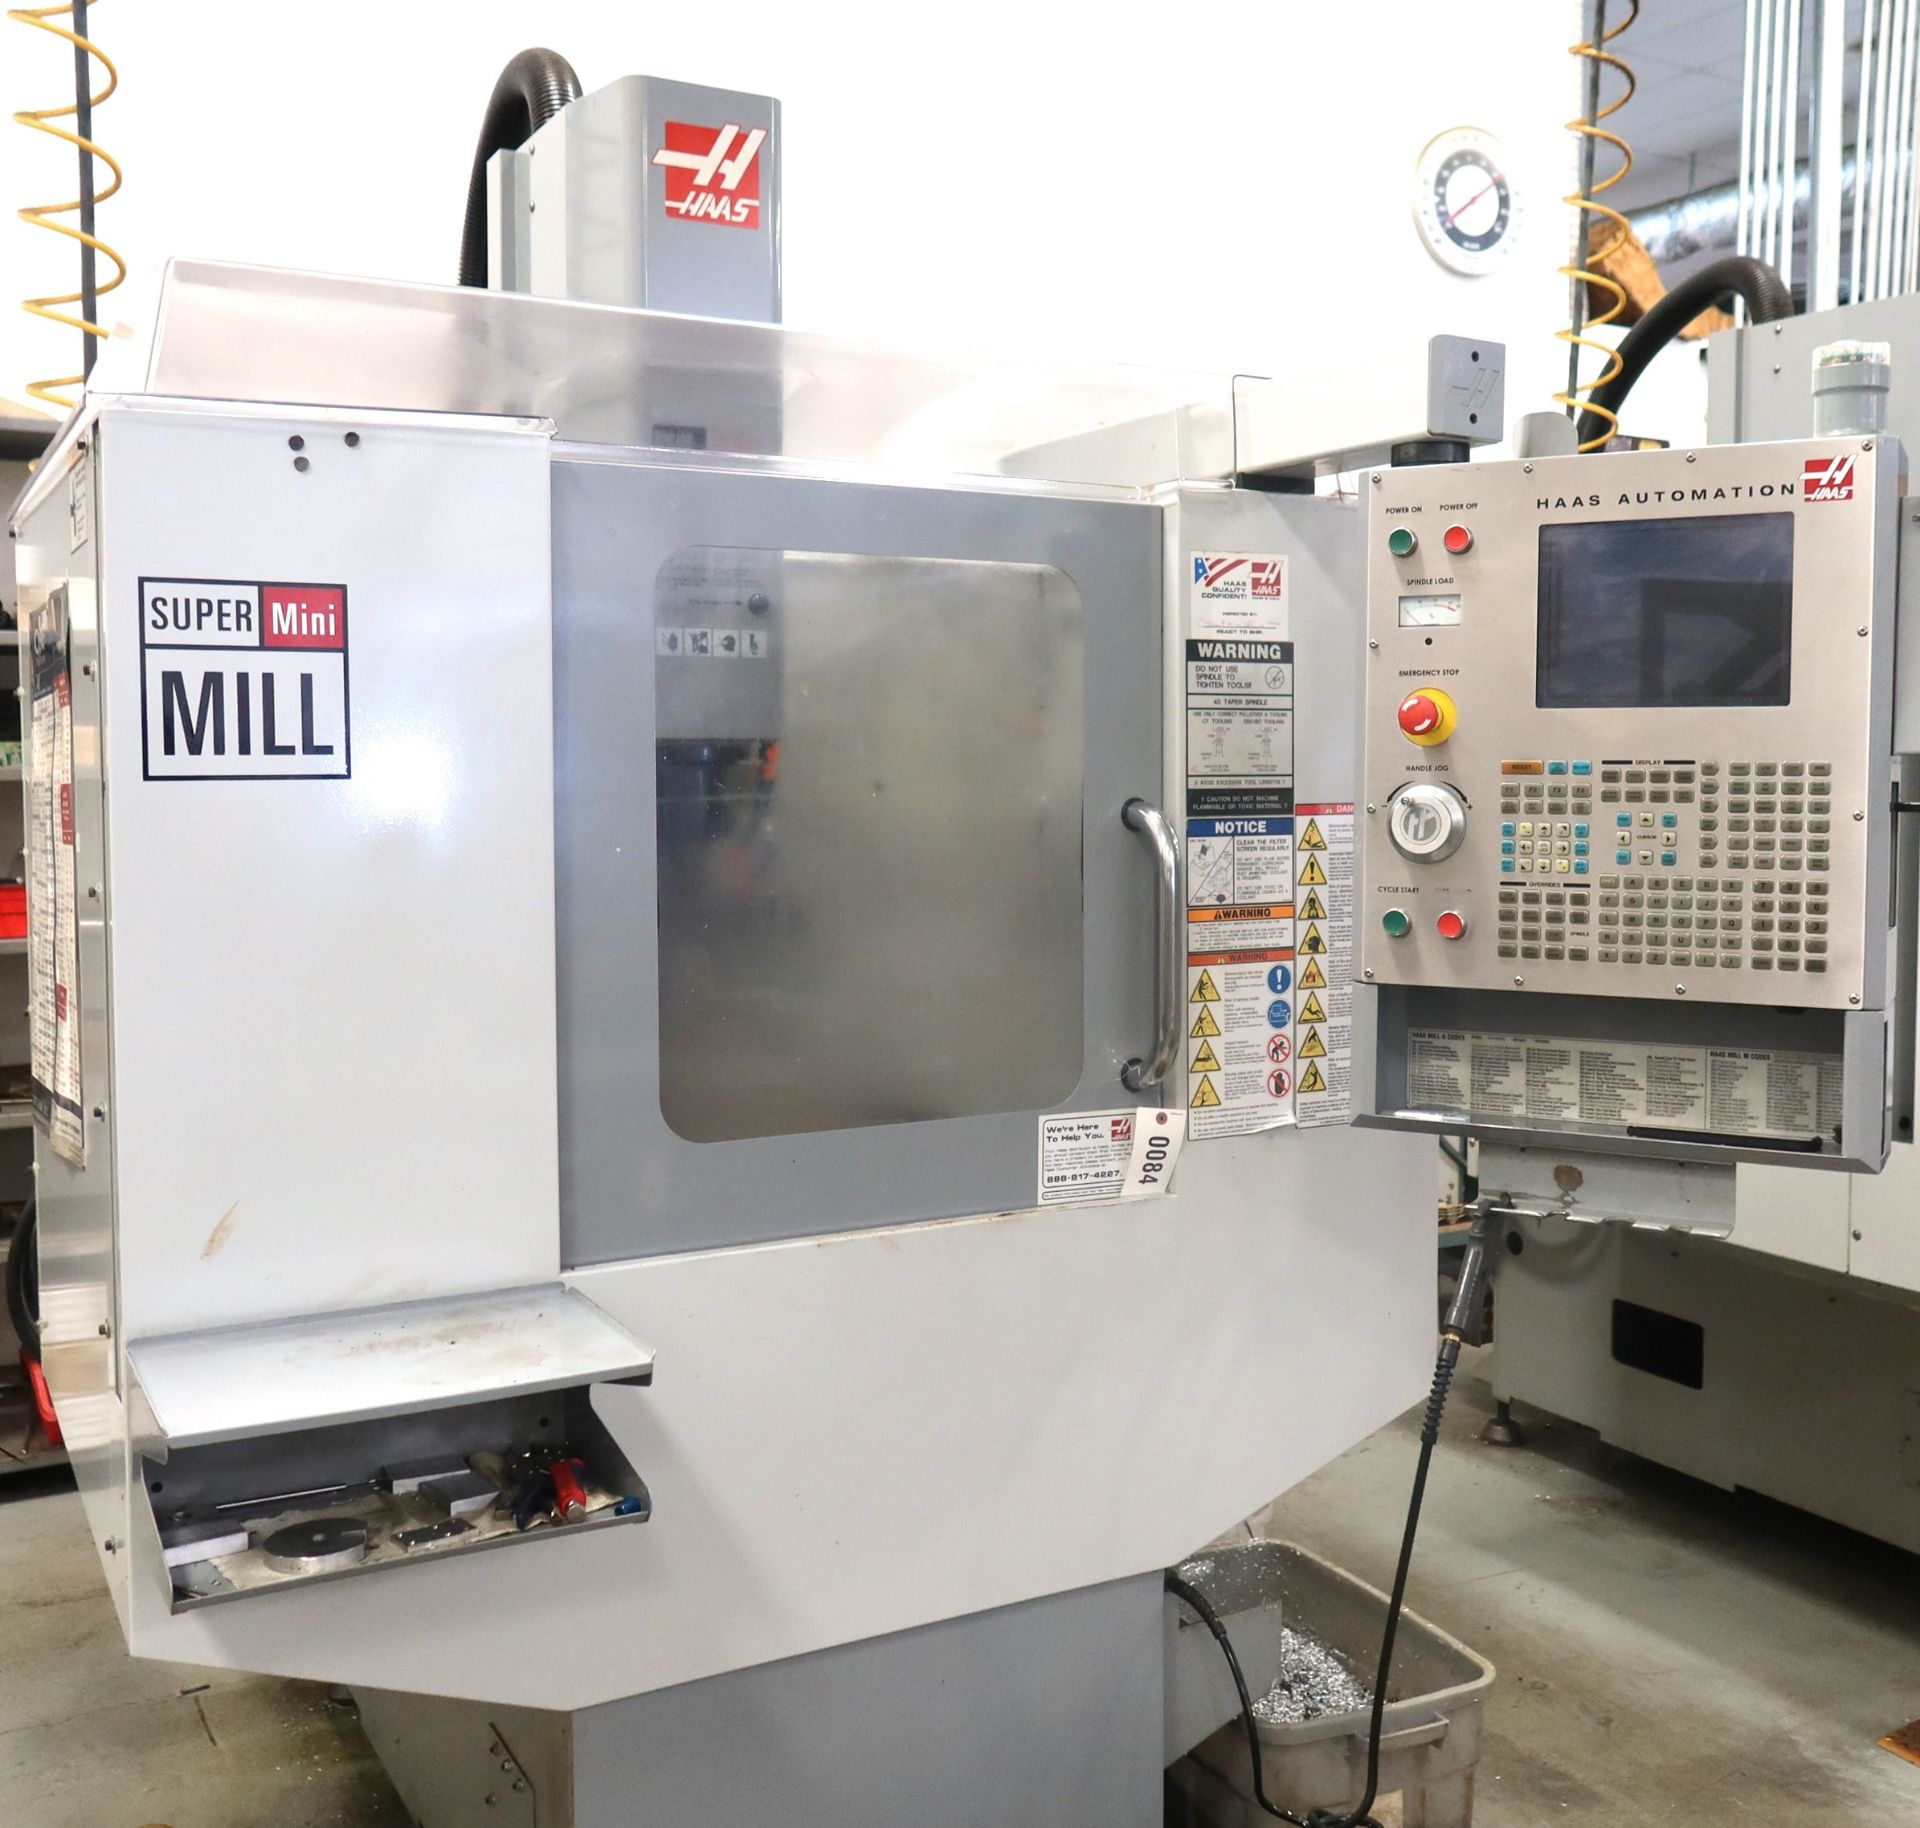 2006 Haas Super Mini Mill 4-axis CNC Vertical Machining Center, SN 46185 - Image 5 of 8